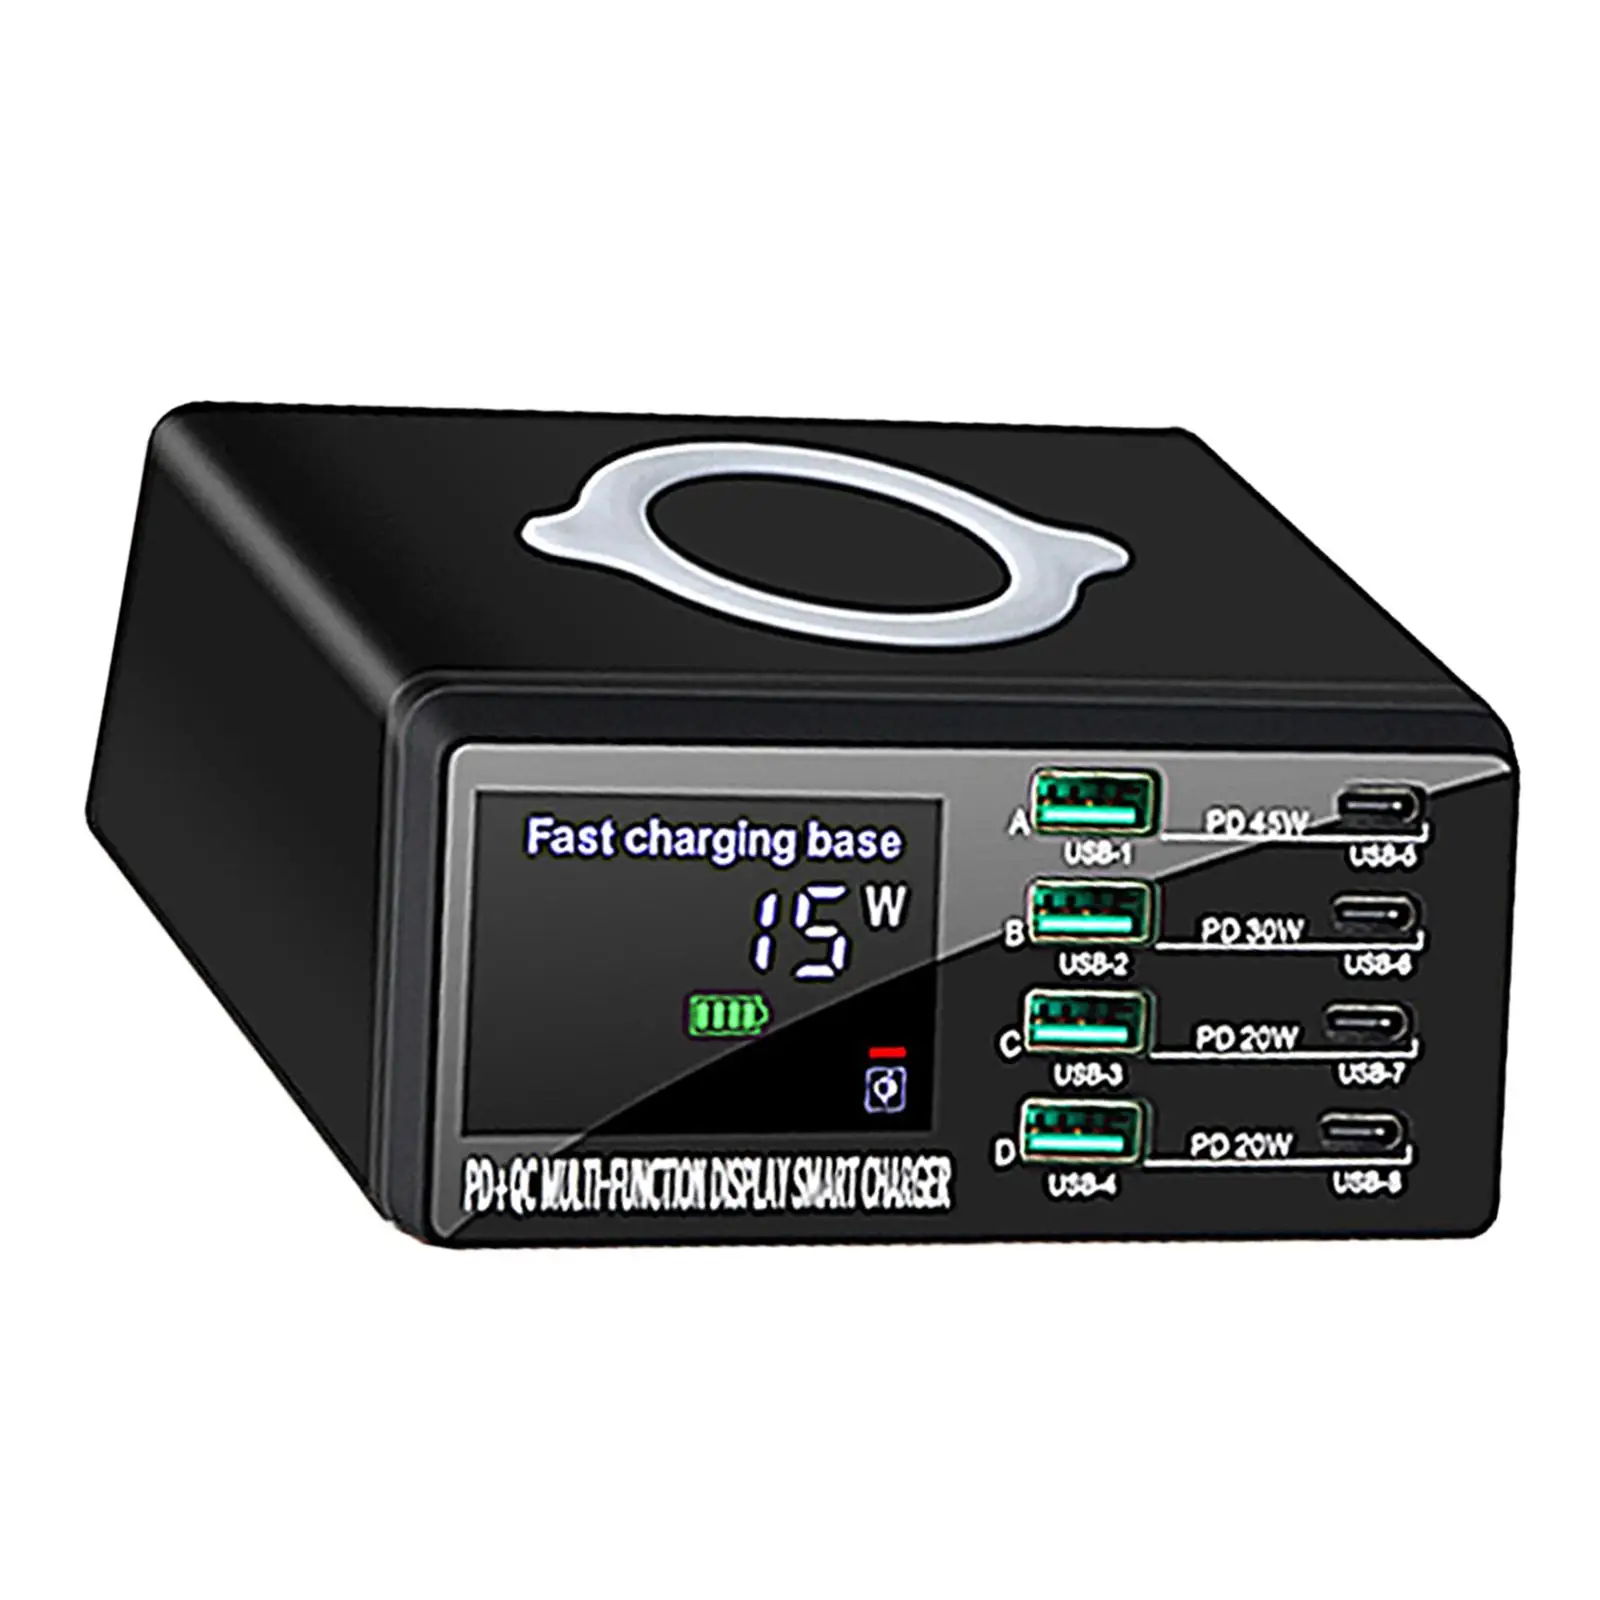 110W 8 Port USB fast charge Multiport USB Charger Multi Device fast charge Station EU